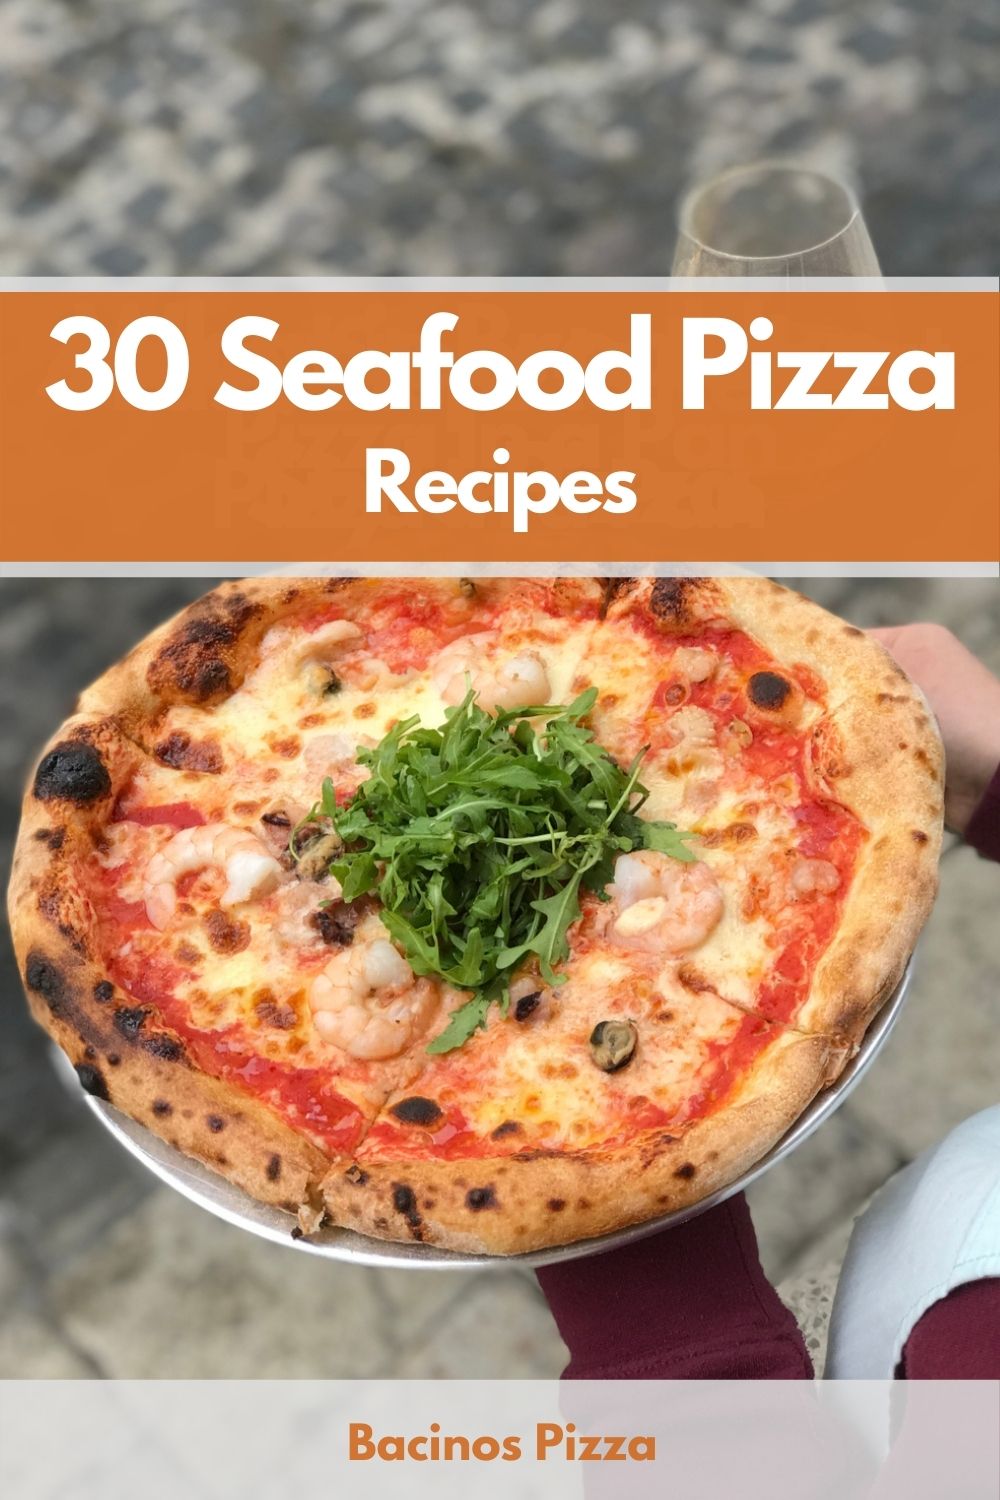 30 Seafood Pizza Recipes pin